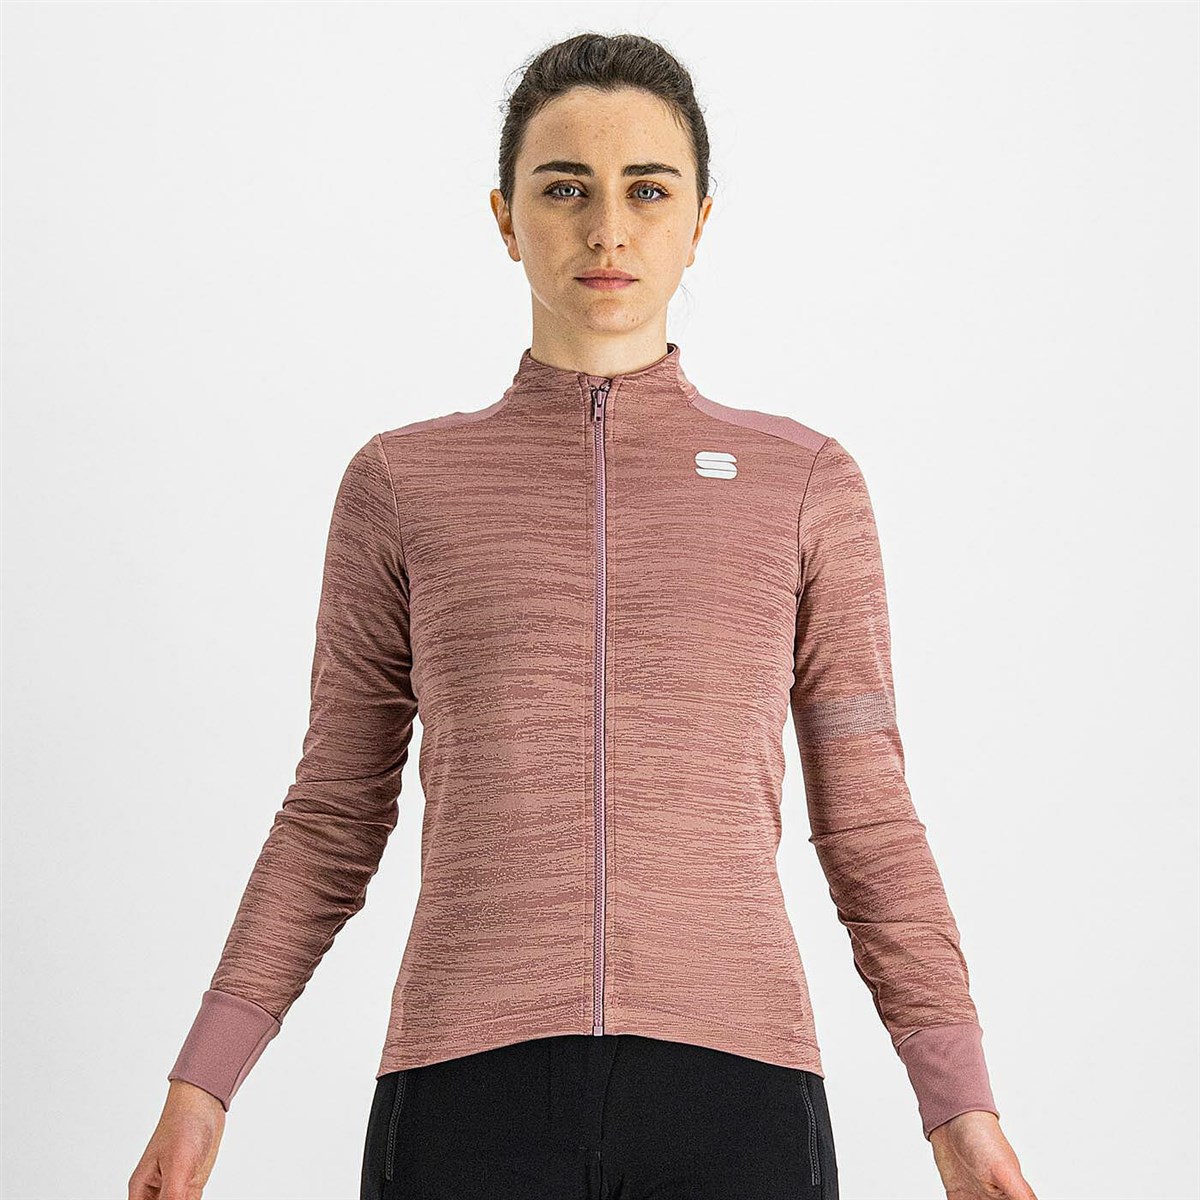 Sportful Supergiara Womens Thermal Long Sleeve Cycling Jersey product image